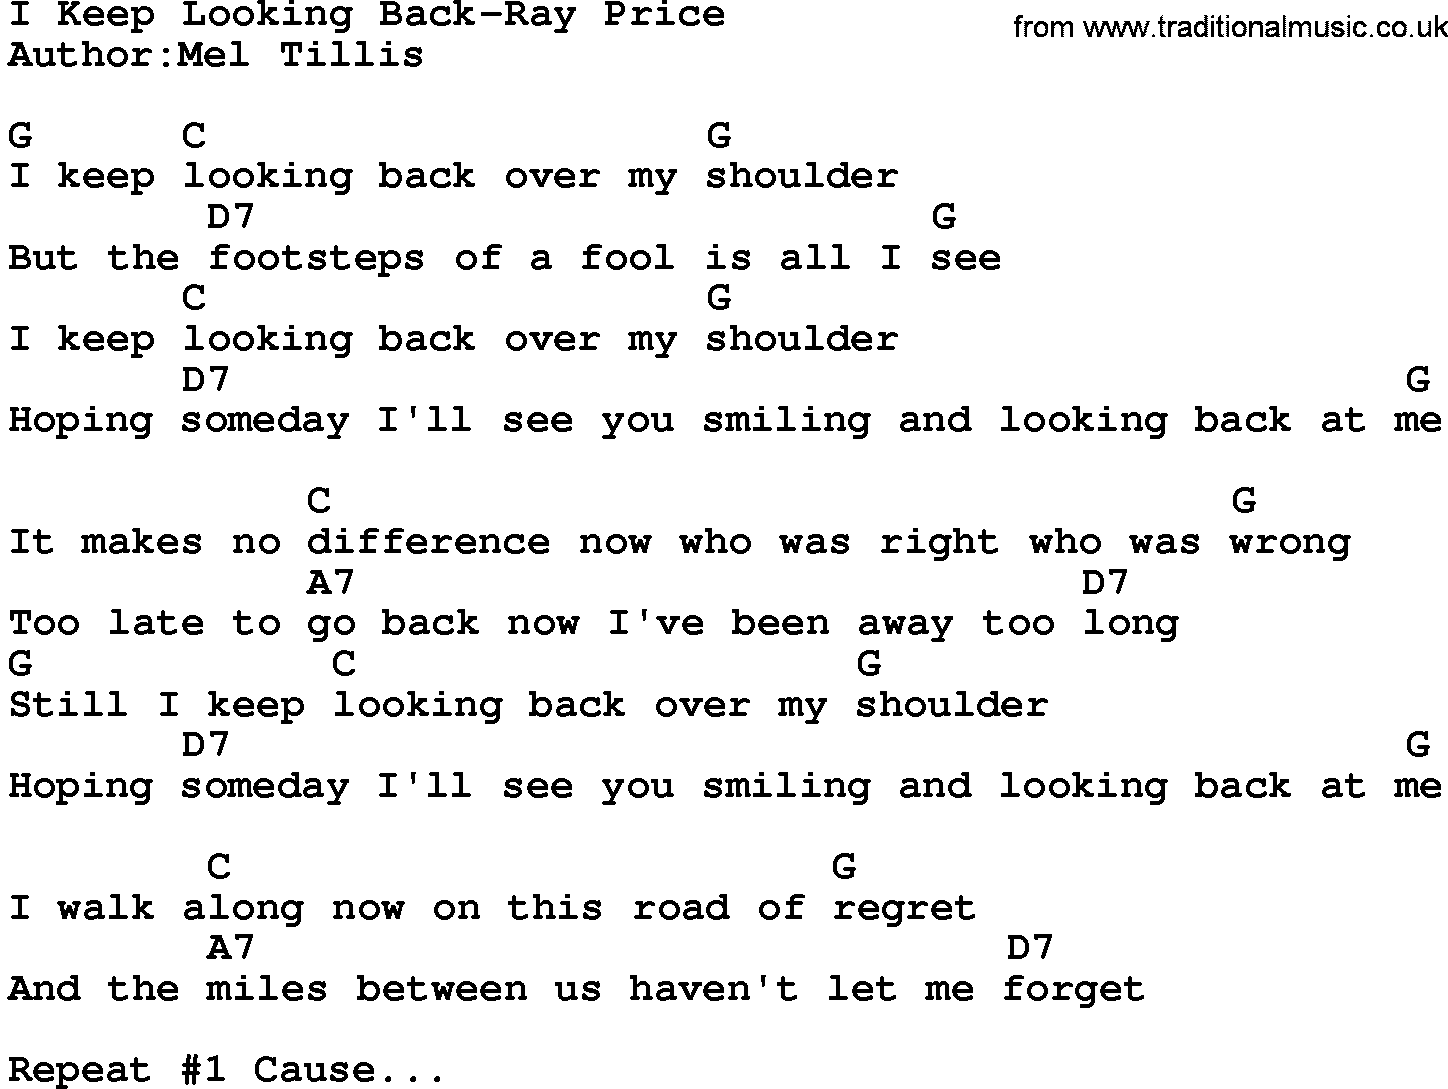 Country music song: I Keep Looking Back-Ray Price lyrics and chords